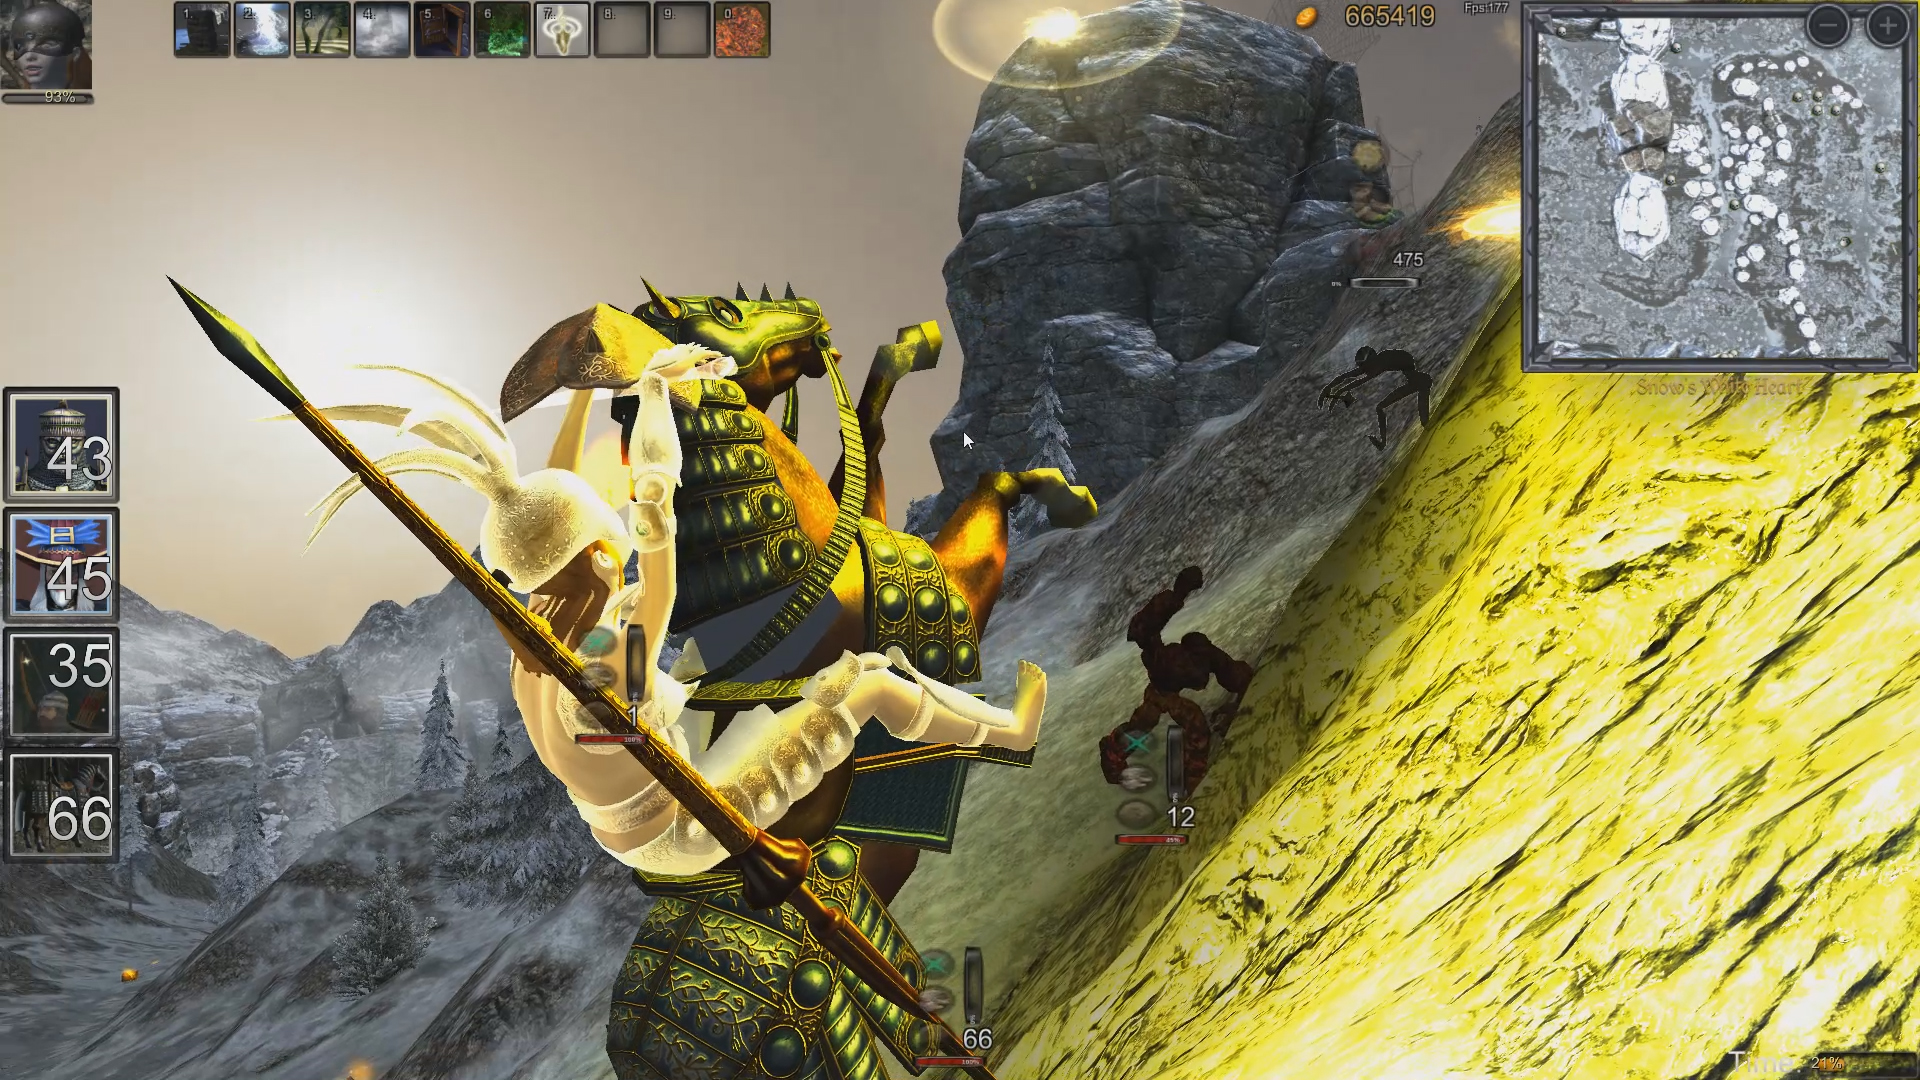 Witches, Heroes and Magic screenshot